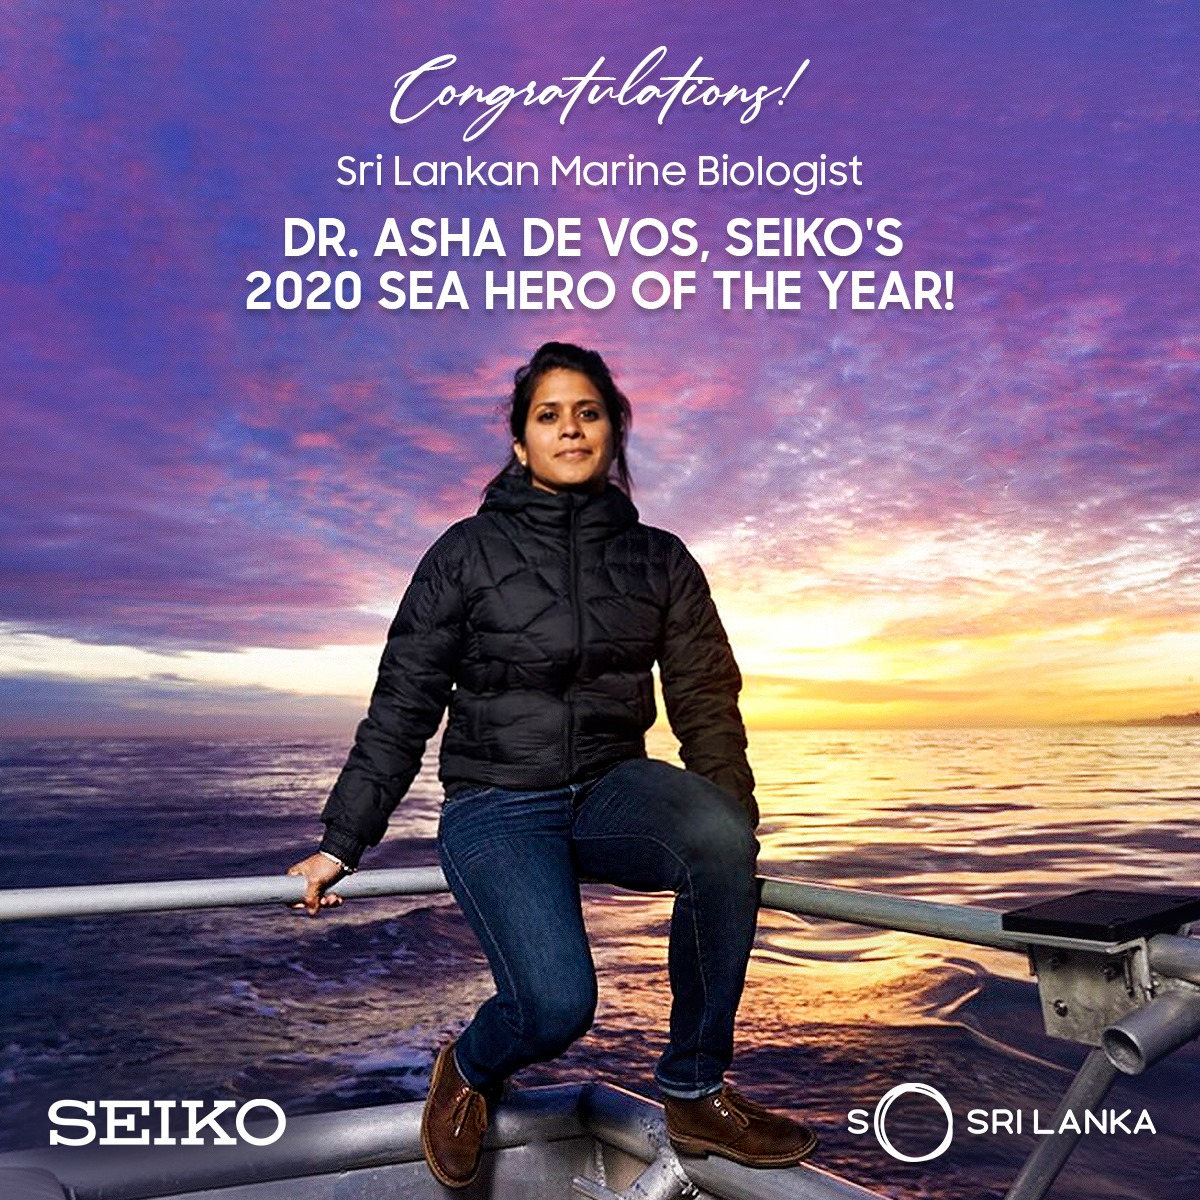 Congratulations to Dr Asha de Vos for being named 2020's Sea Hero of the Year by Seiko.